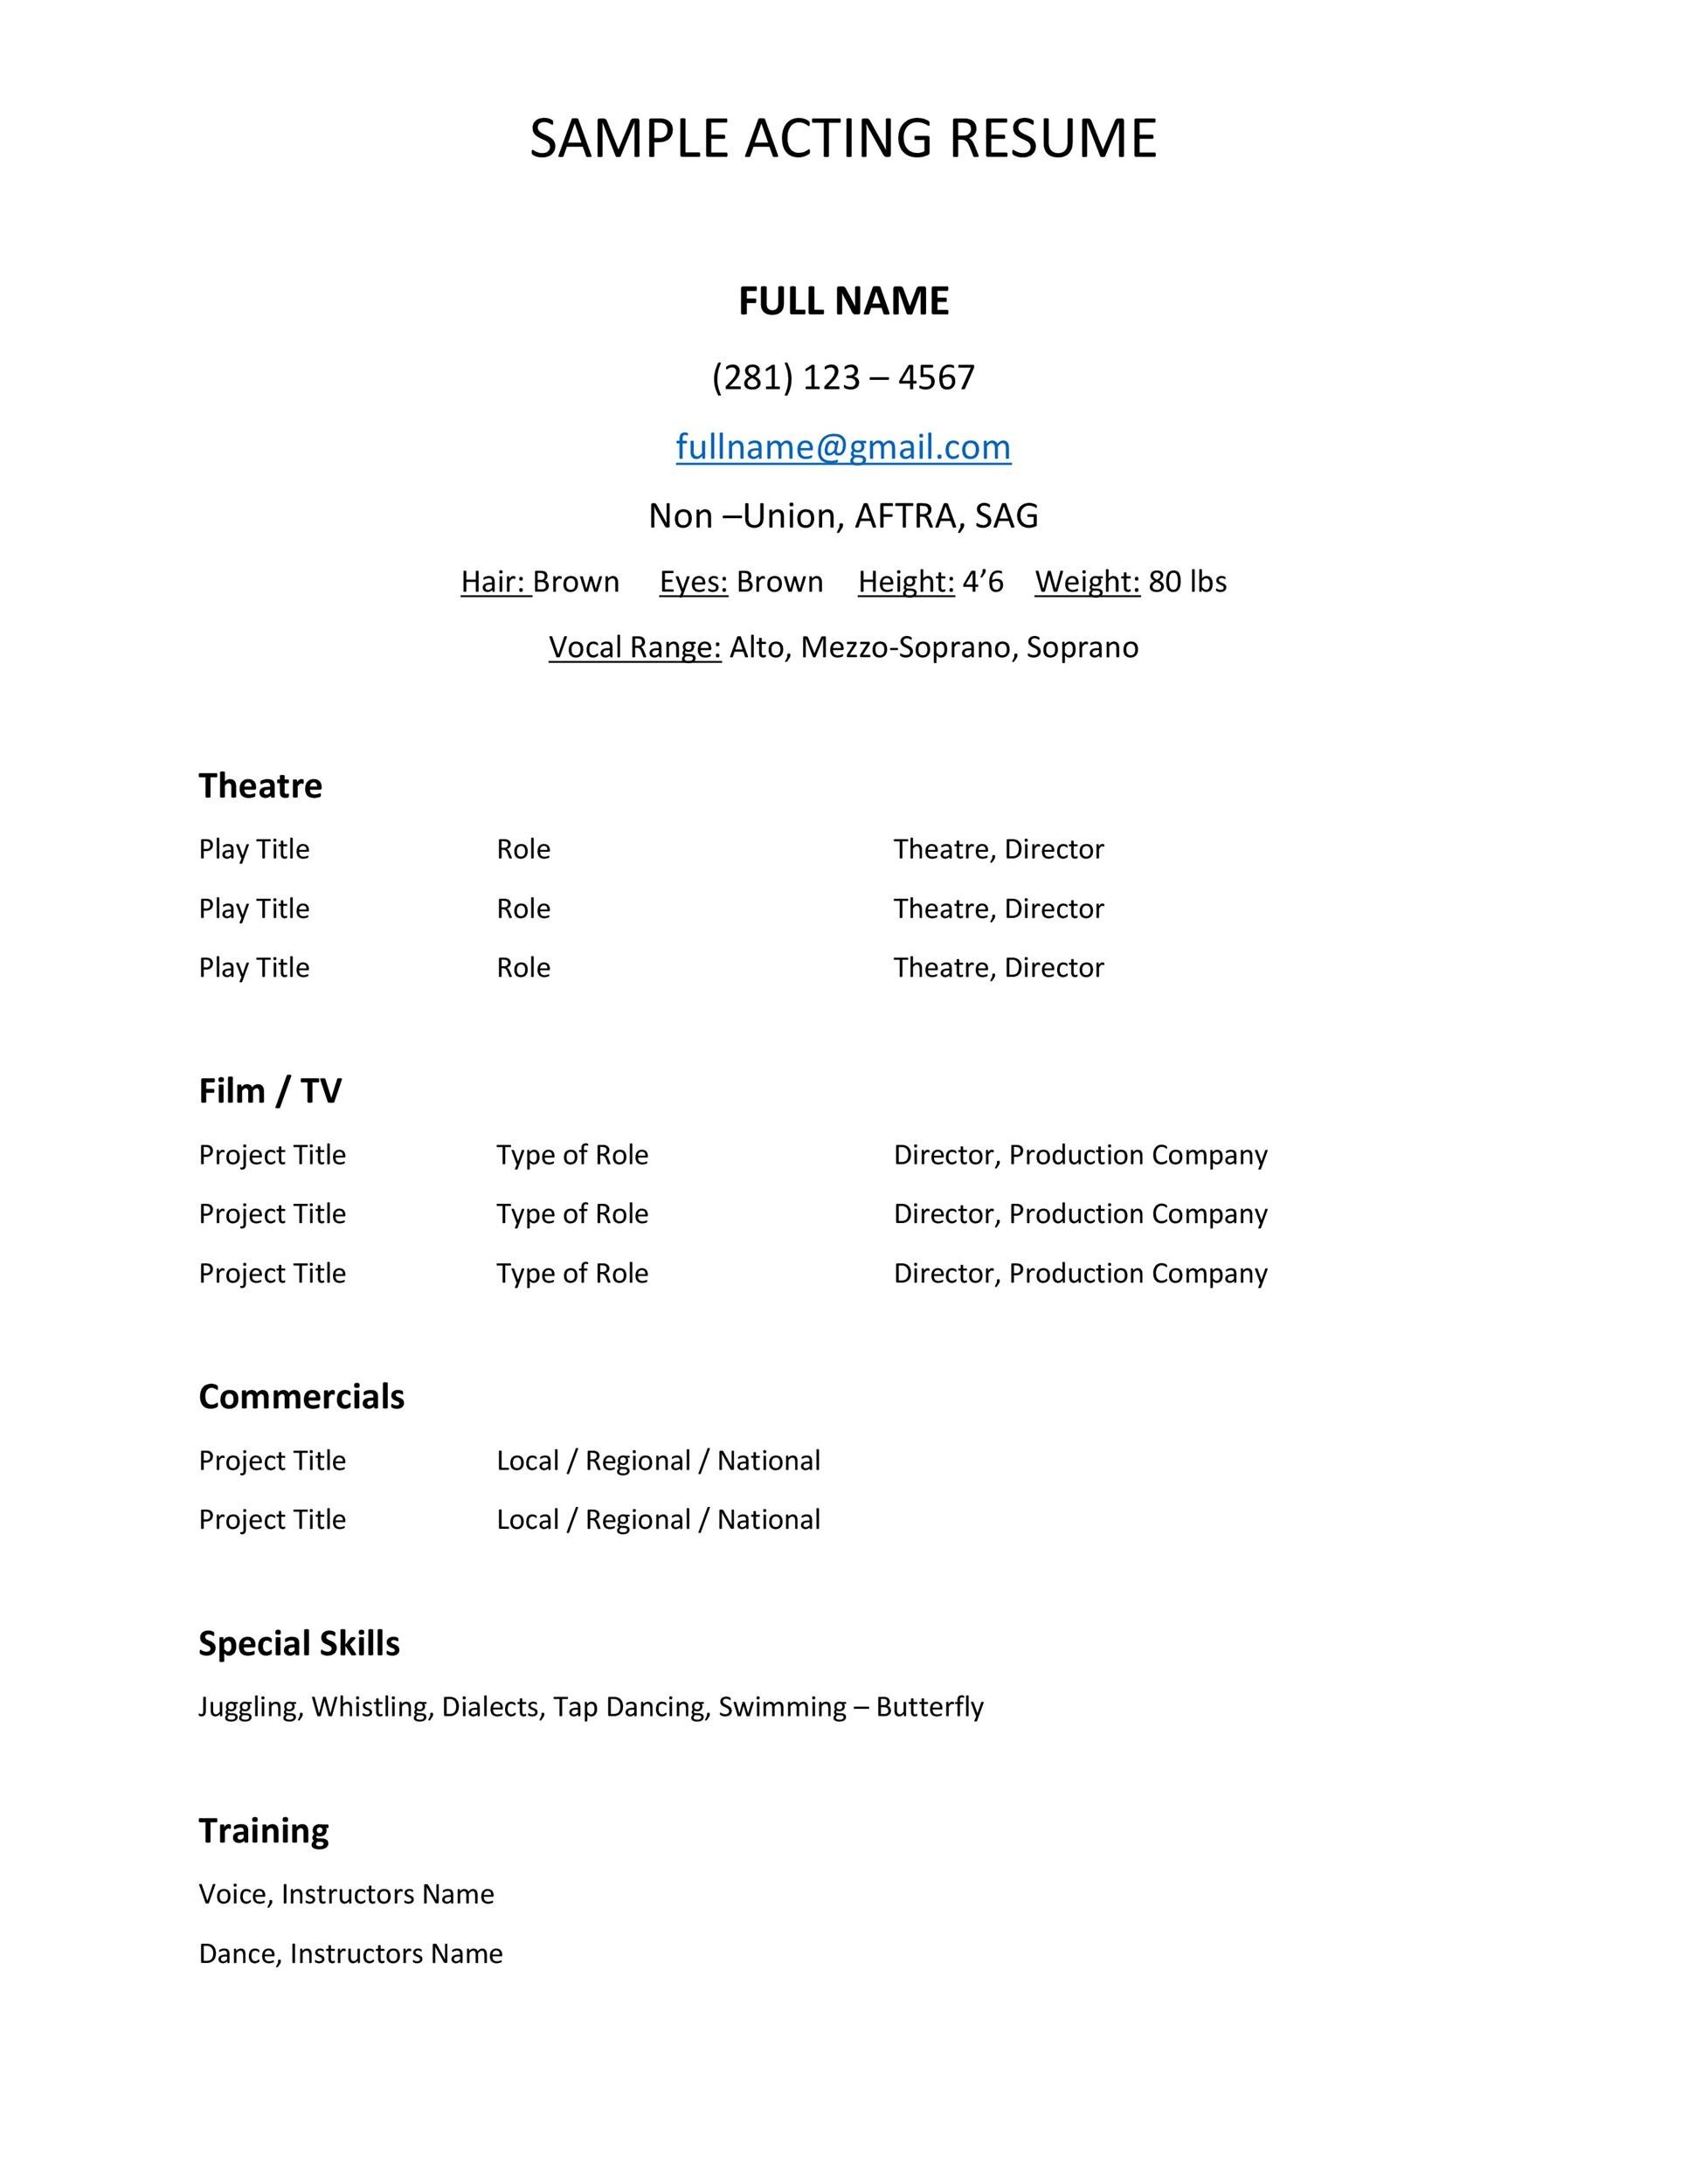 Acting Resume Template Google Docs from templatelab.com